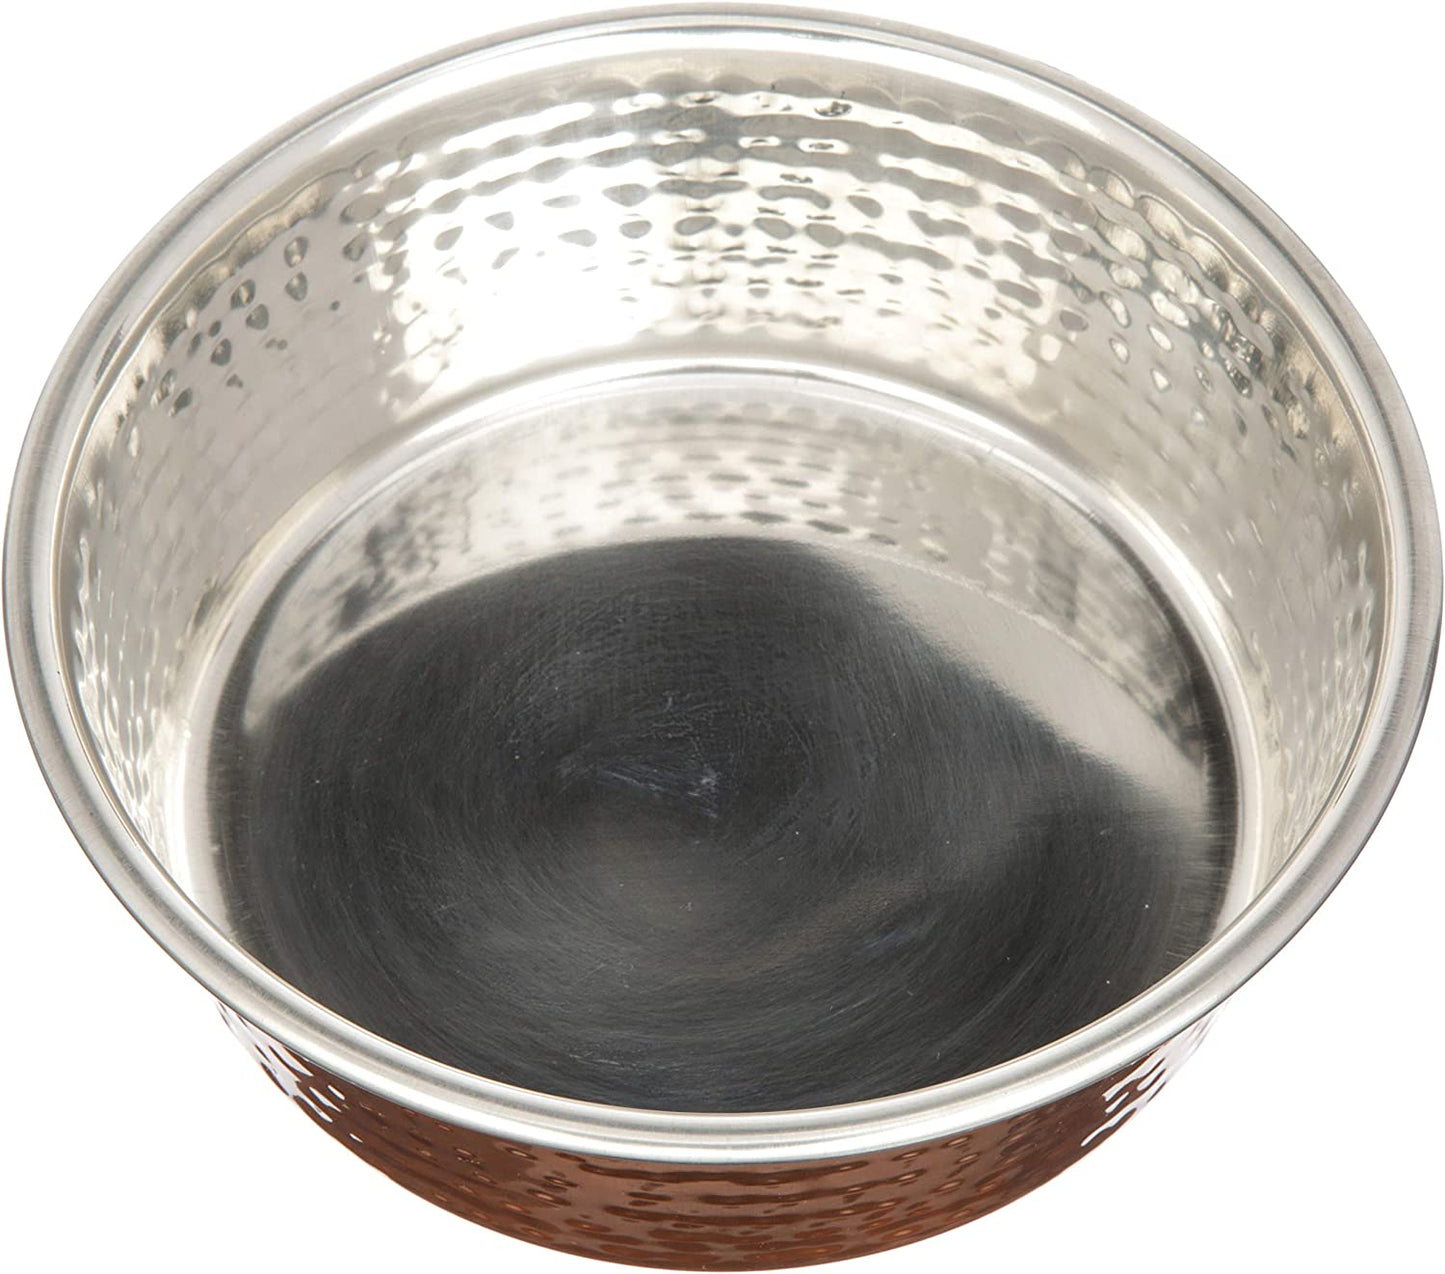 Hammered Stainless Steel Pet Bowl with Copper Coating - Deluxe Luxury Style Dog and Cat Dish (Medium, 32 Oz.)